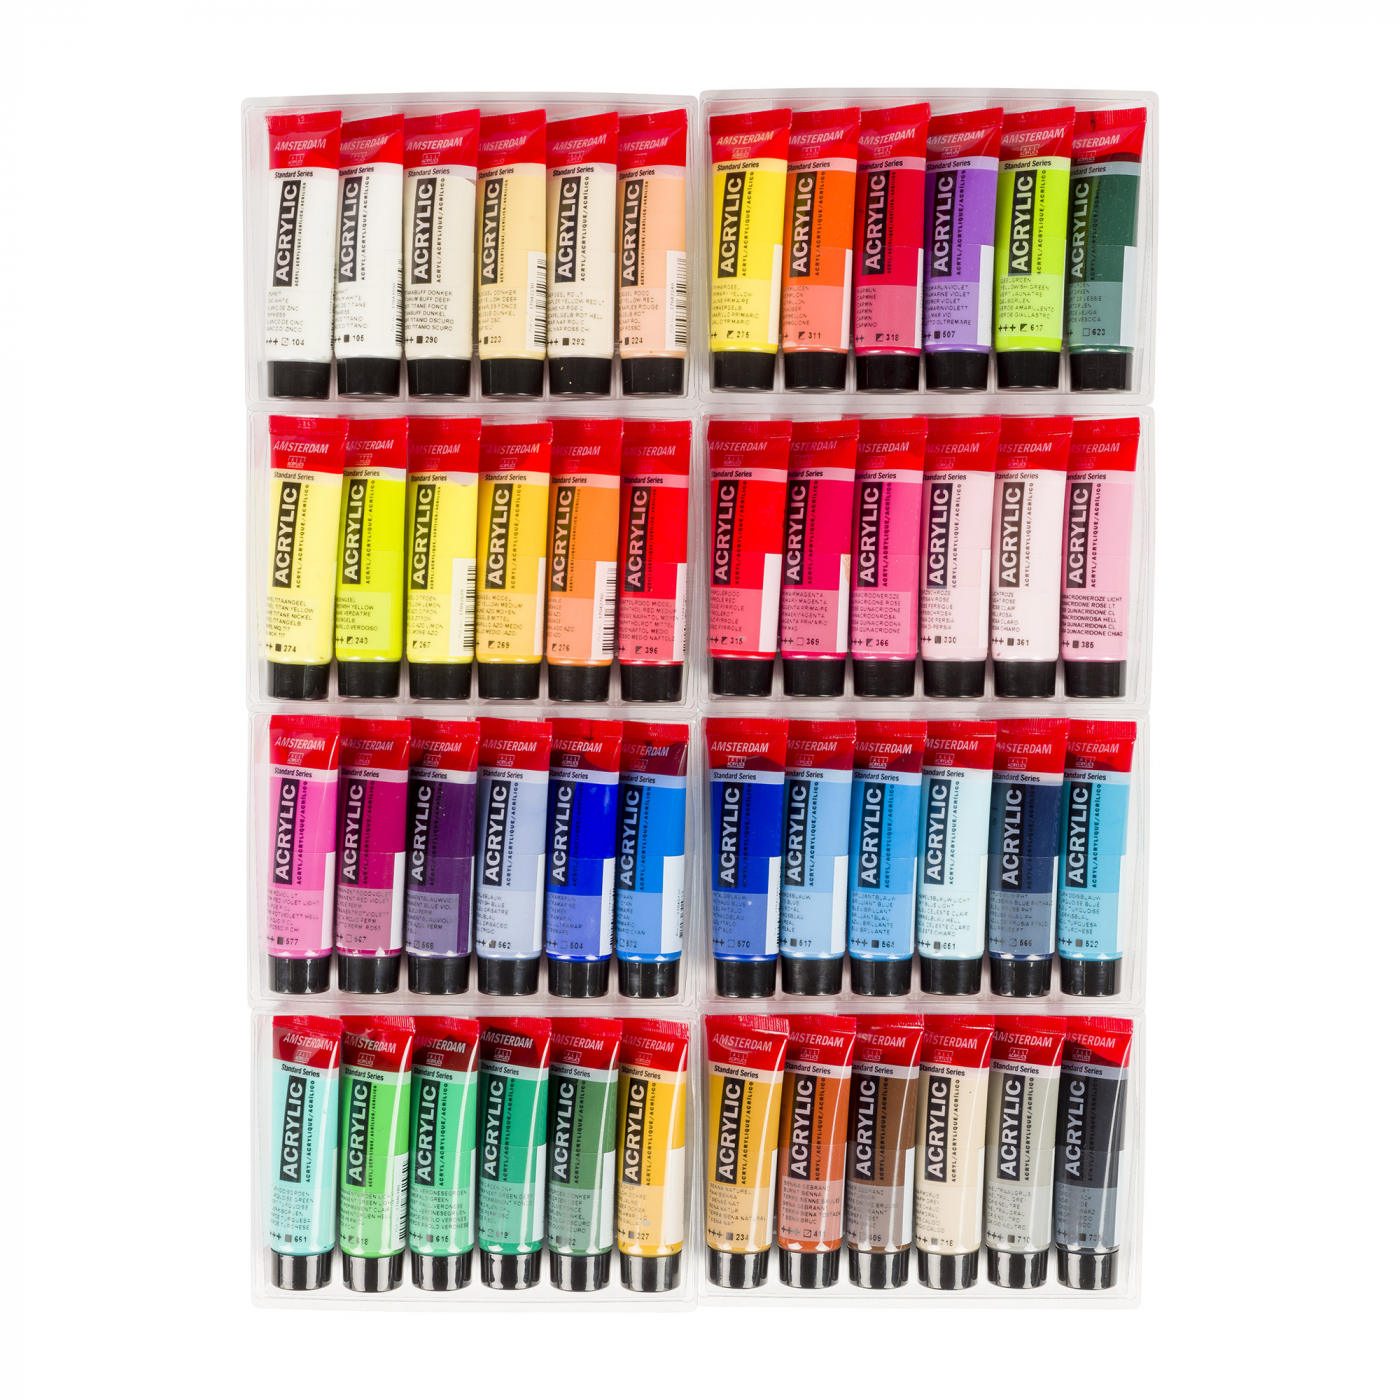 Acrylic Standard Set 48 x 20 ml in the group Kids / Classroom / Classroom Paint sets at Pen Store (111760)